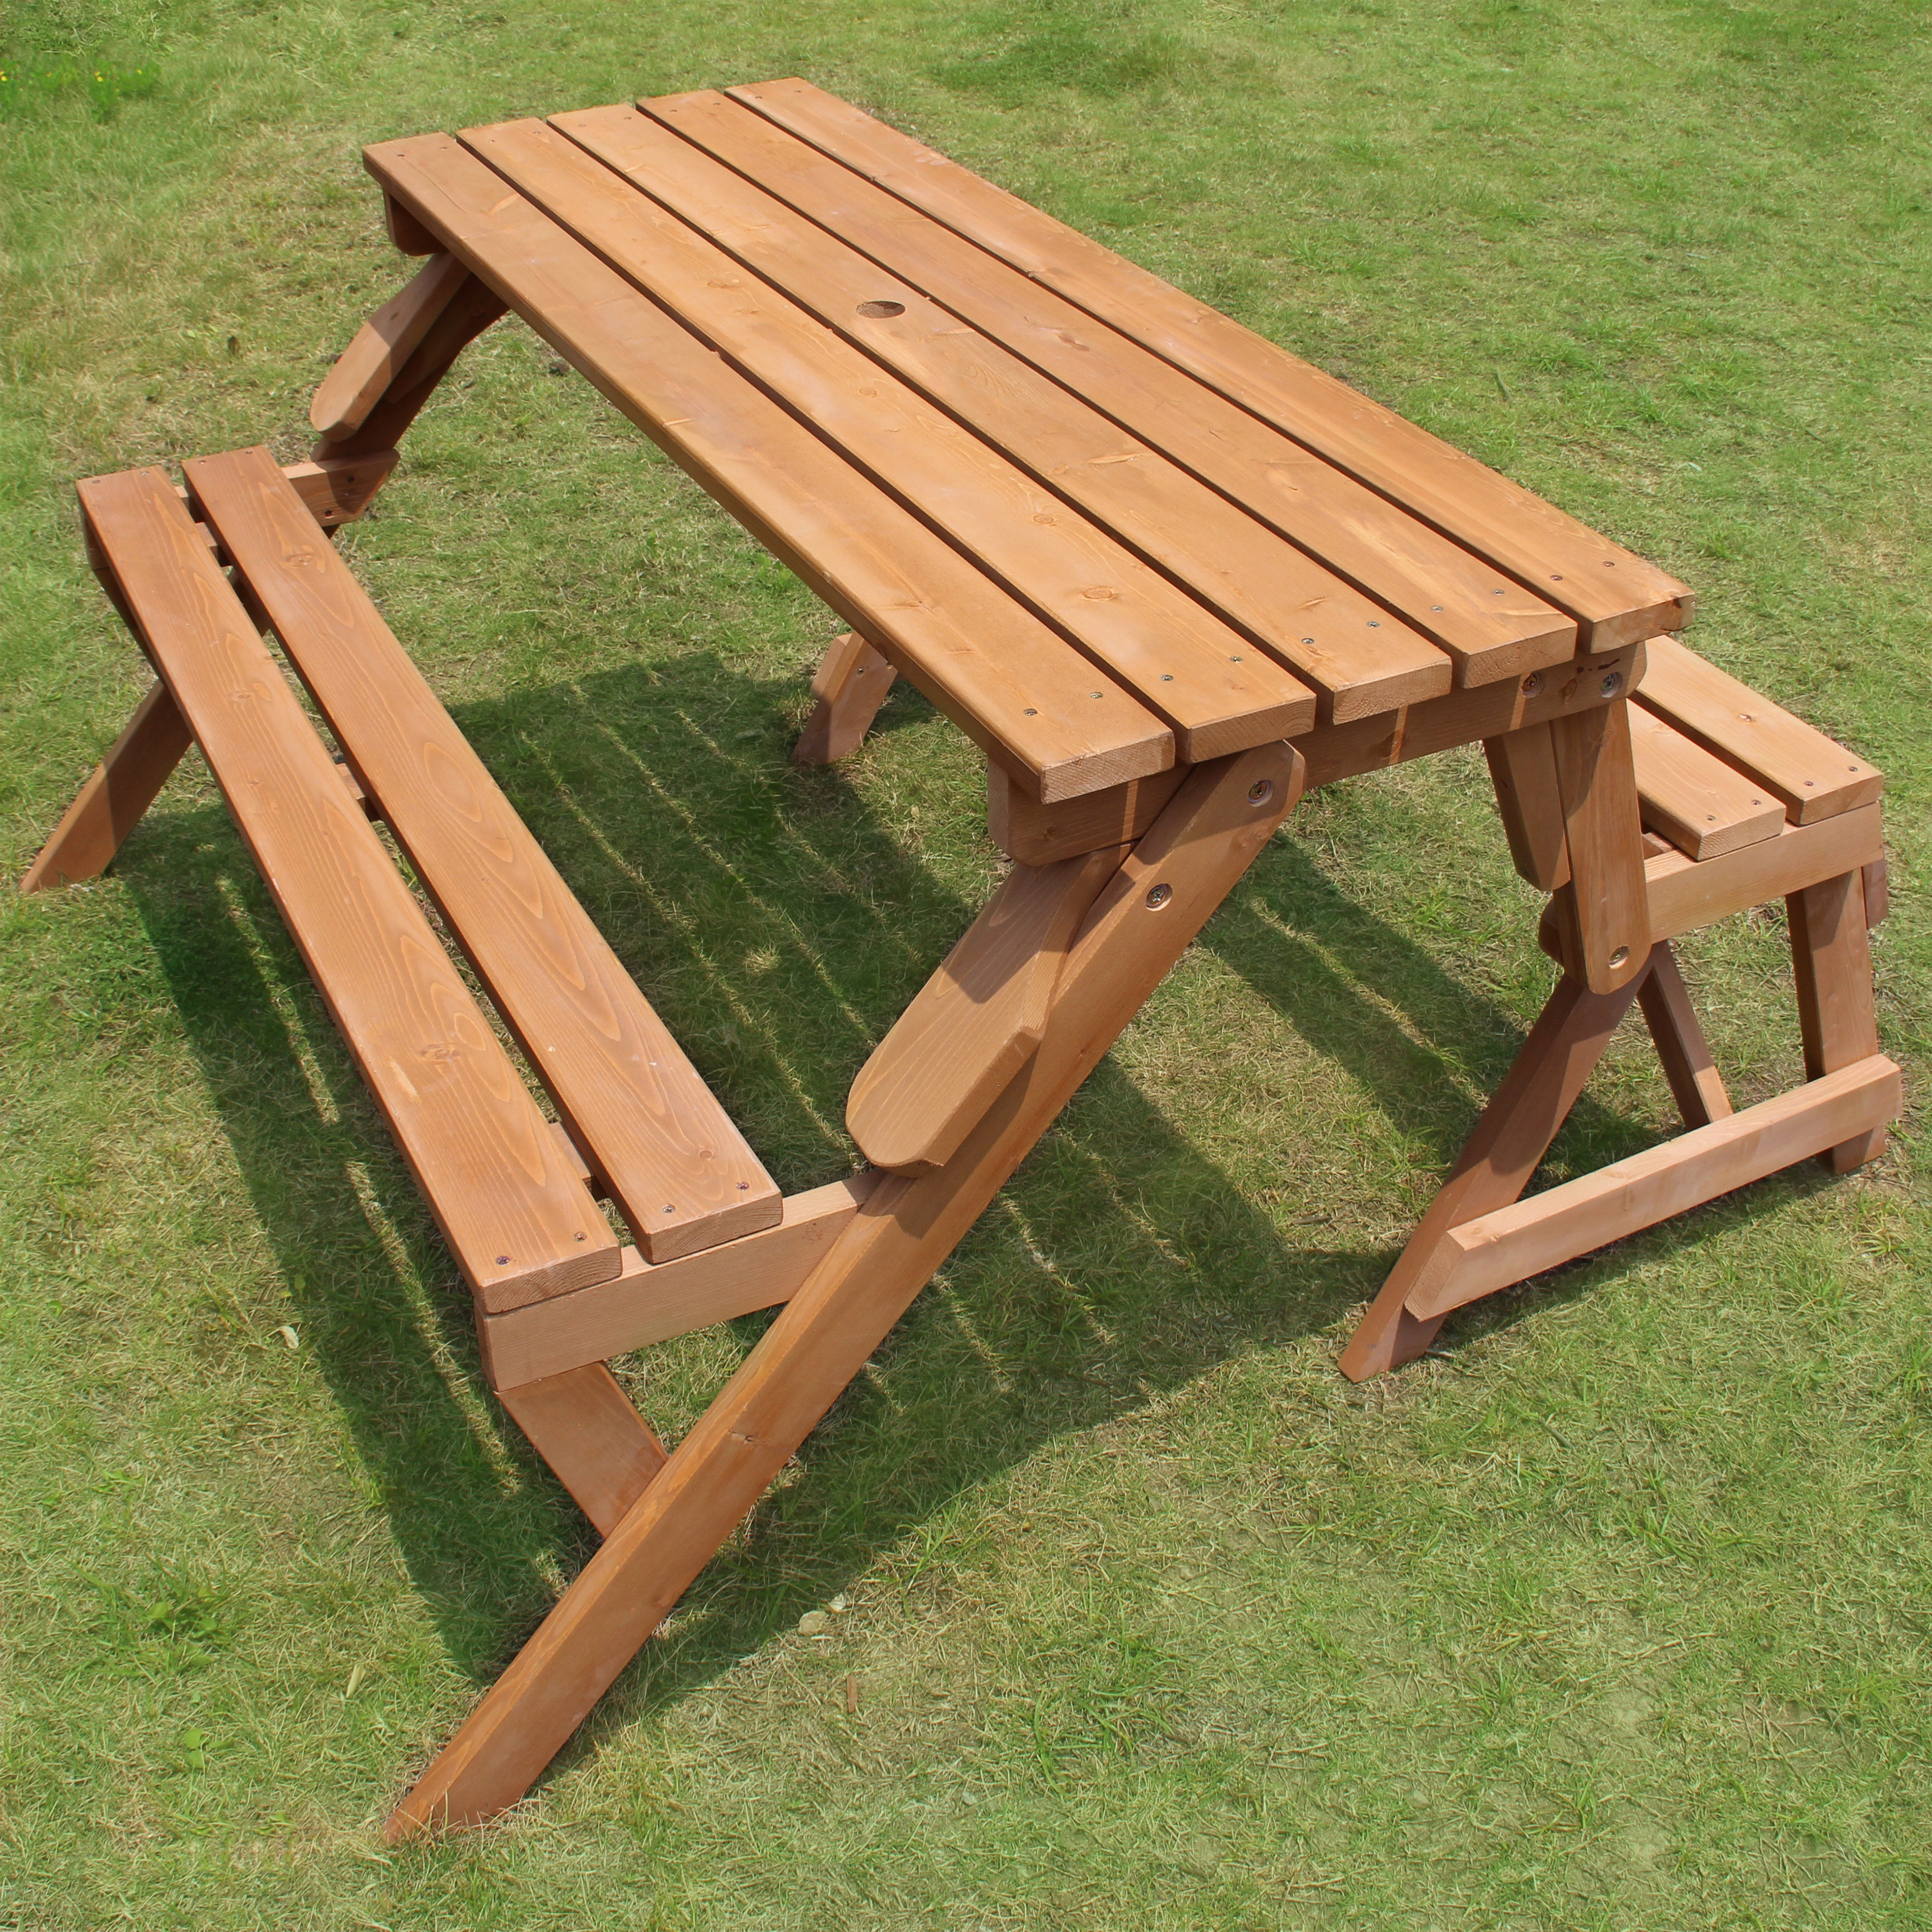 Mpg-act04 Wood Picnic Table - Garden Bench- Wood